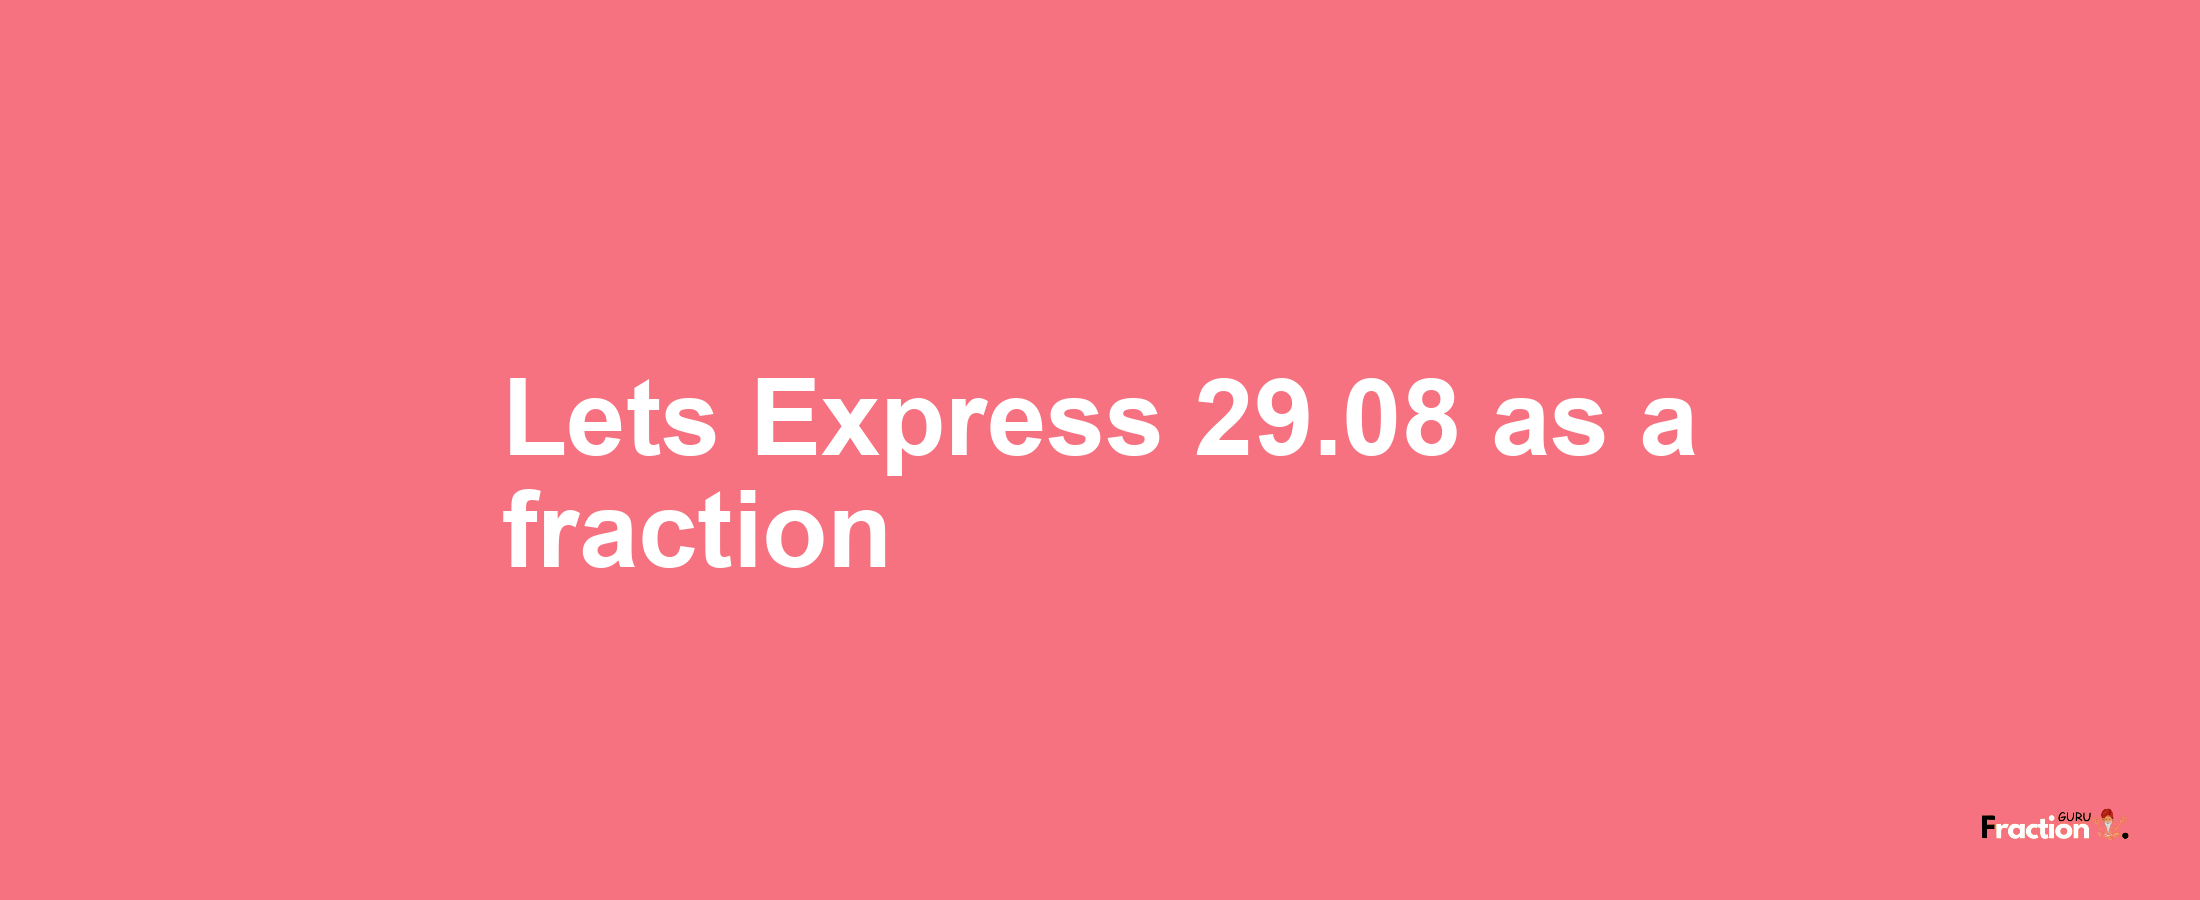 Lets Express 29.08 as afraction